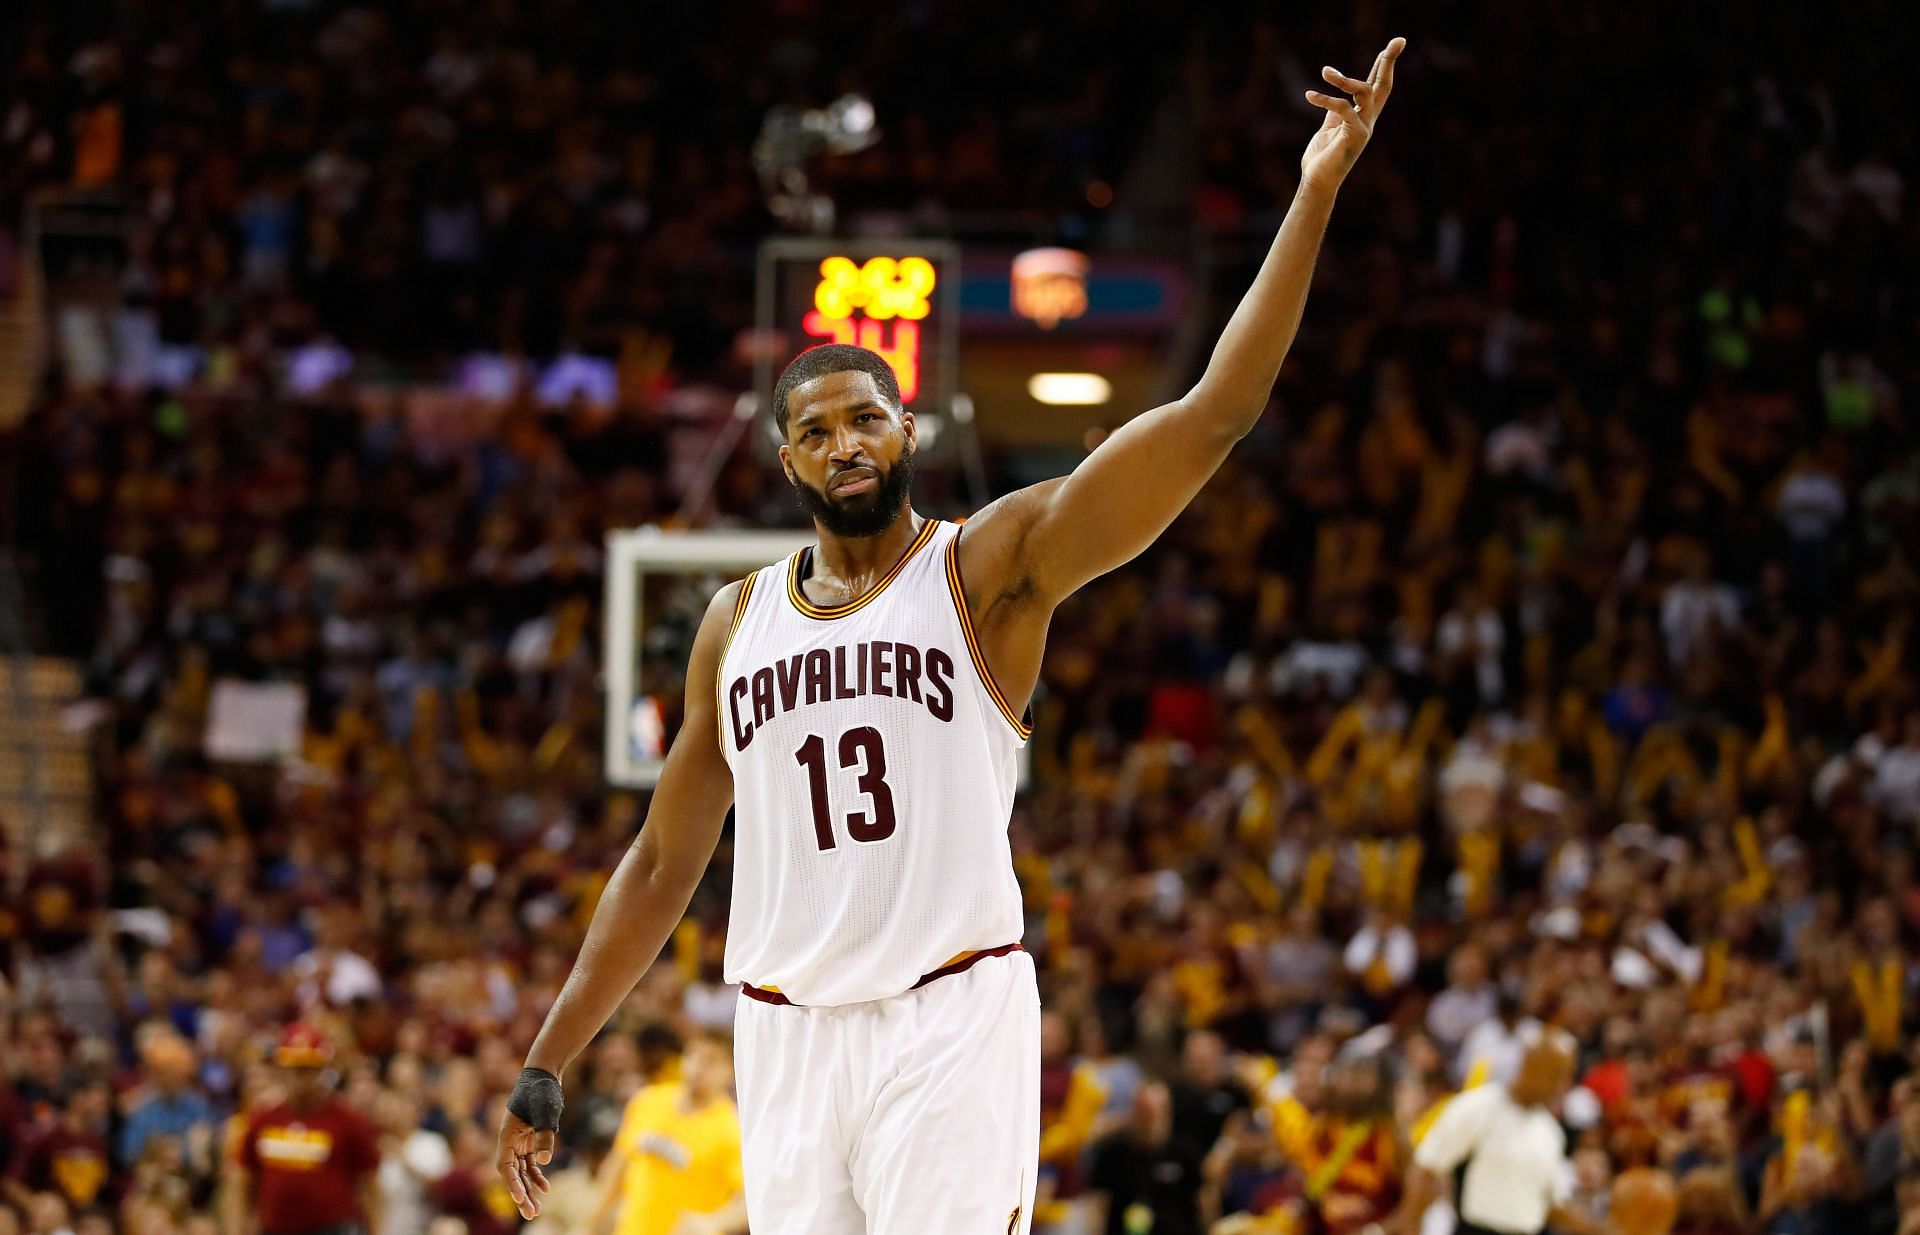 Tristan Thompson playing for the Cleveland Cavaliers